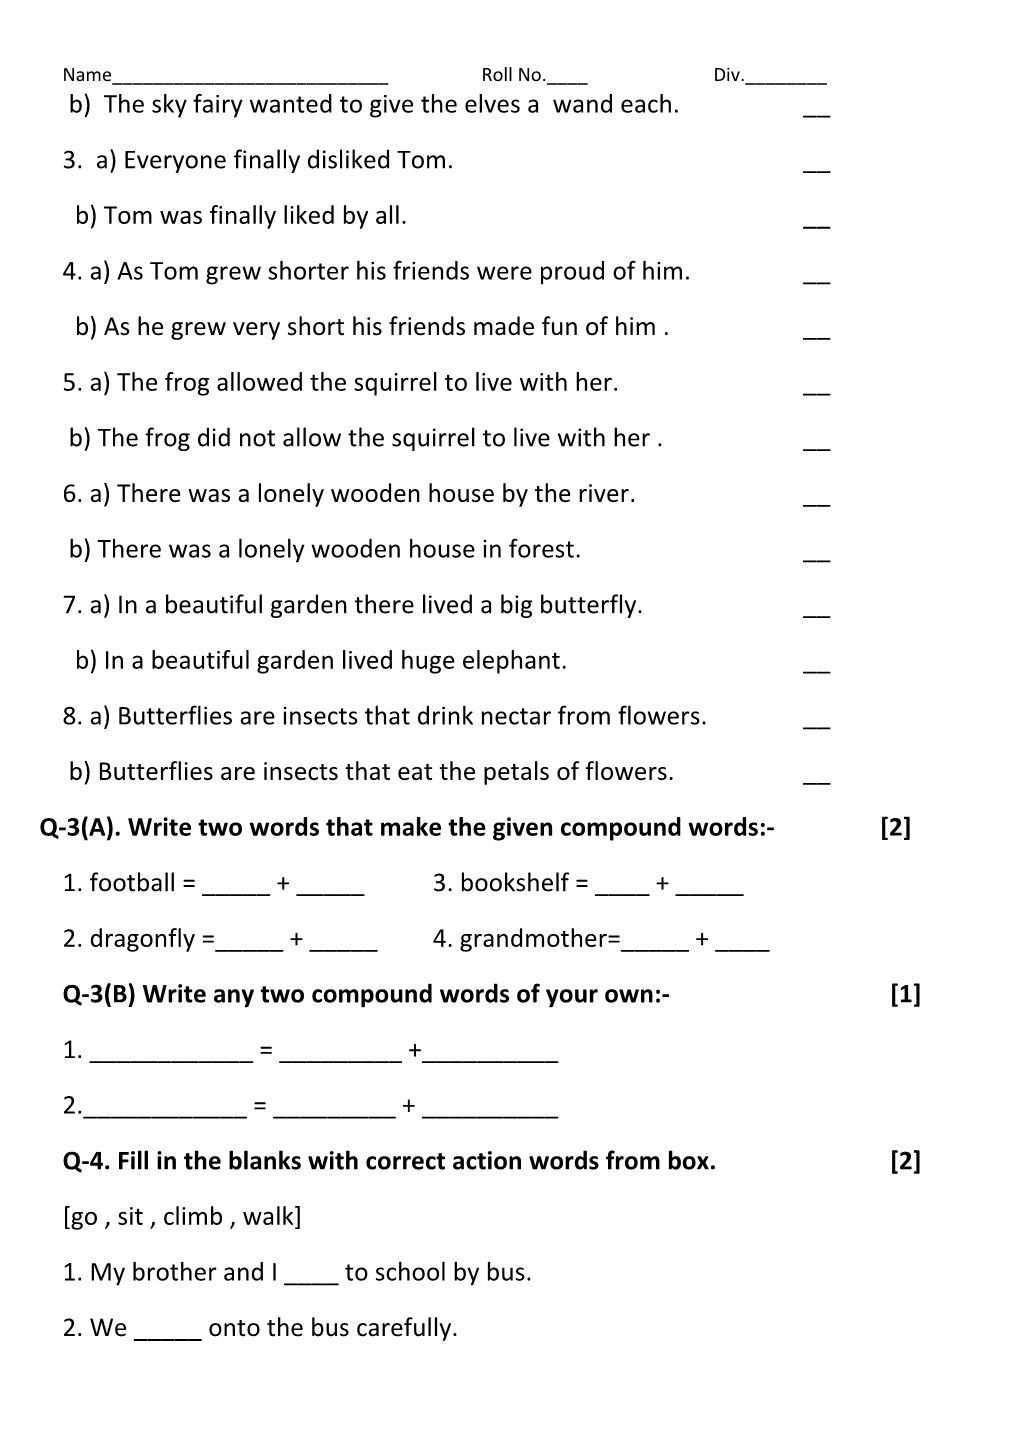 Q-2(A) Fill in the Blanks:- 5